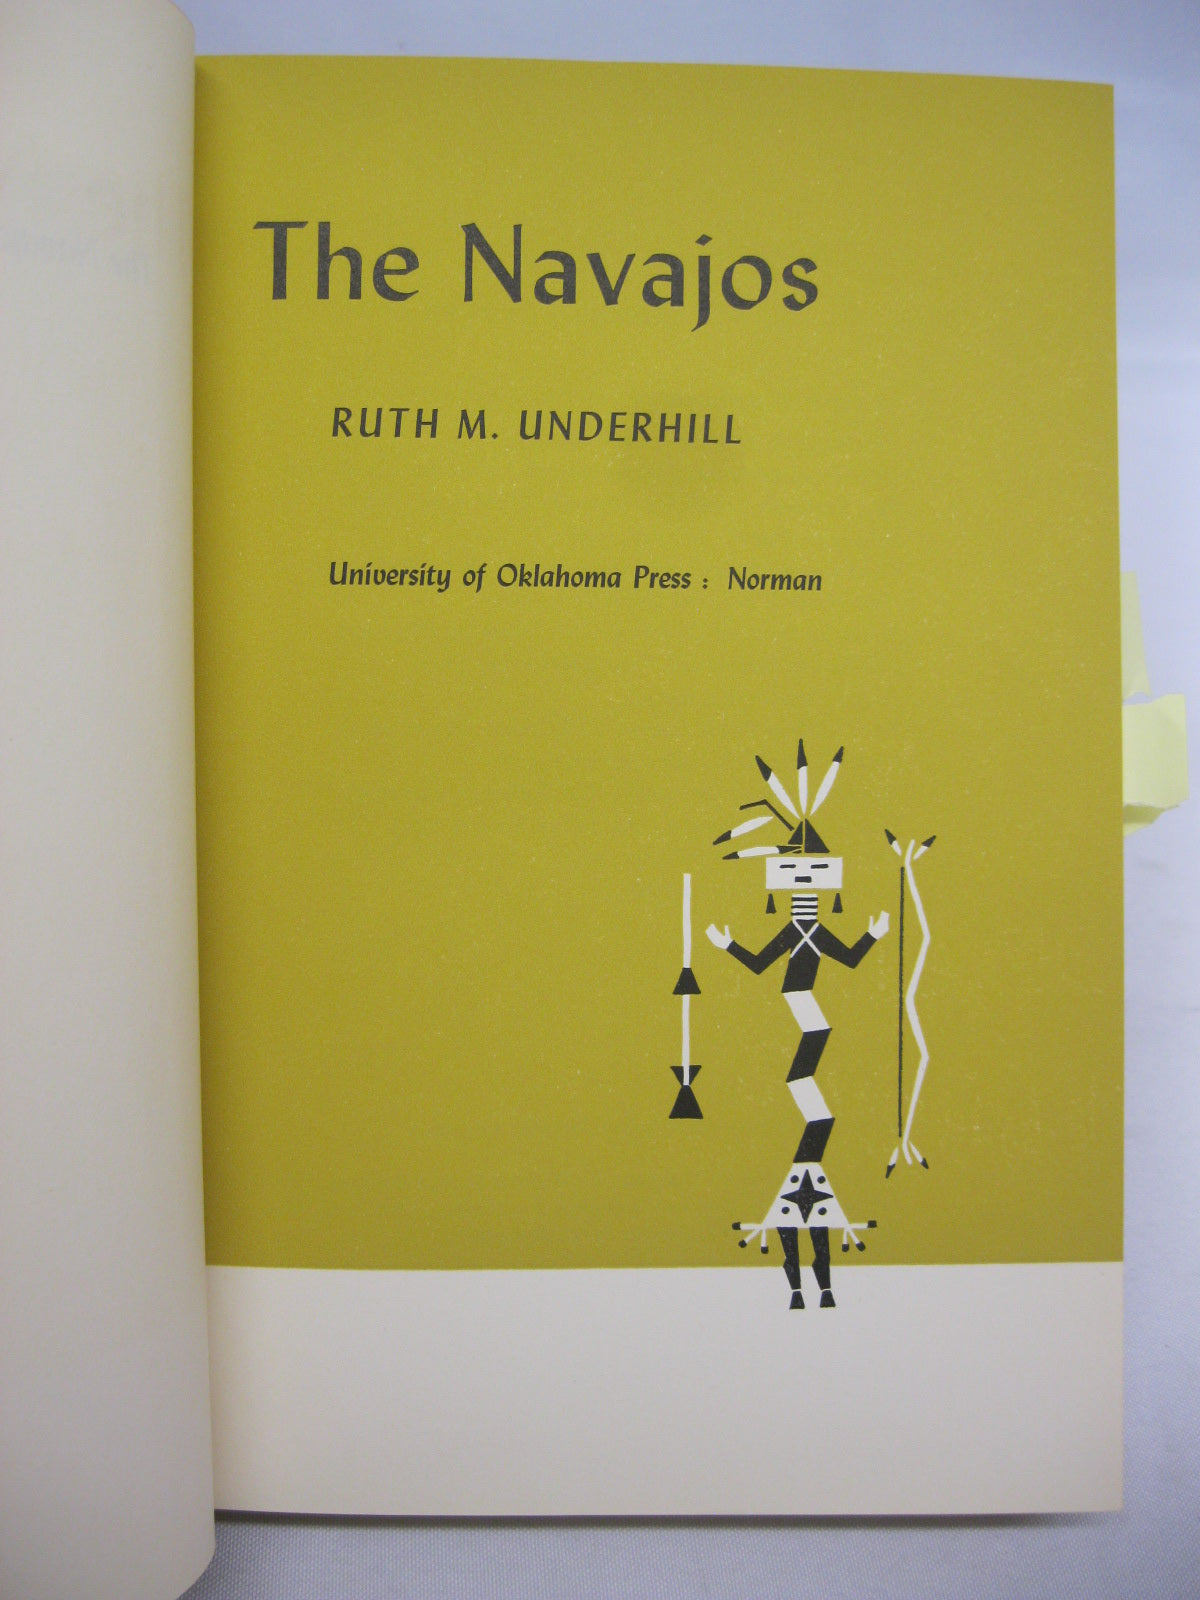 The Navajos by Ruth M Underhill